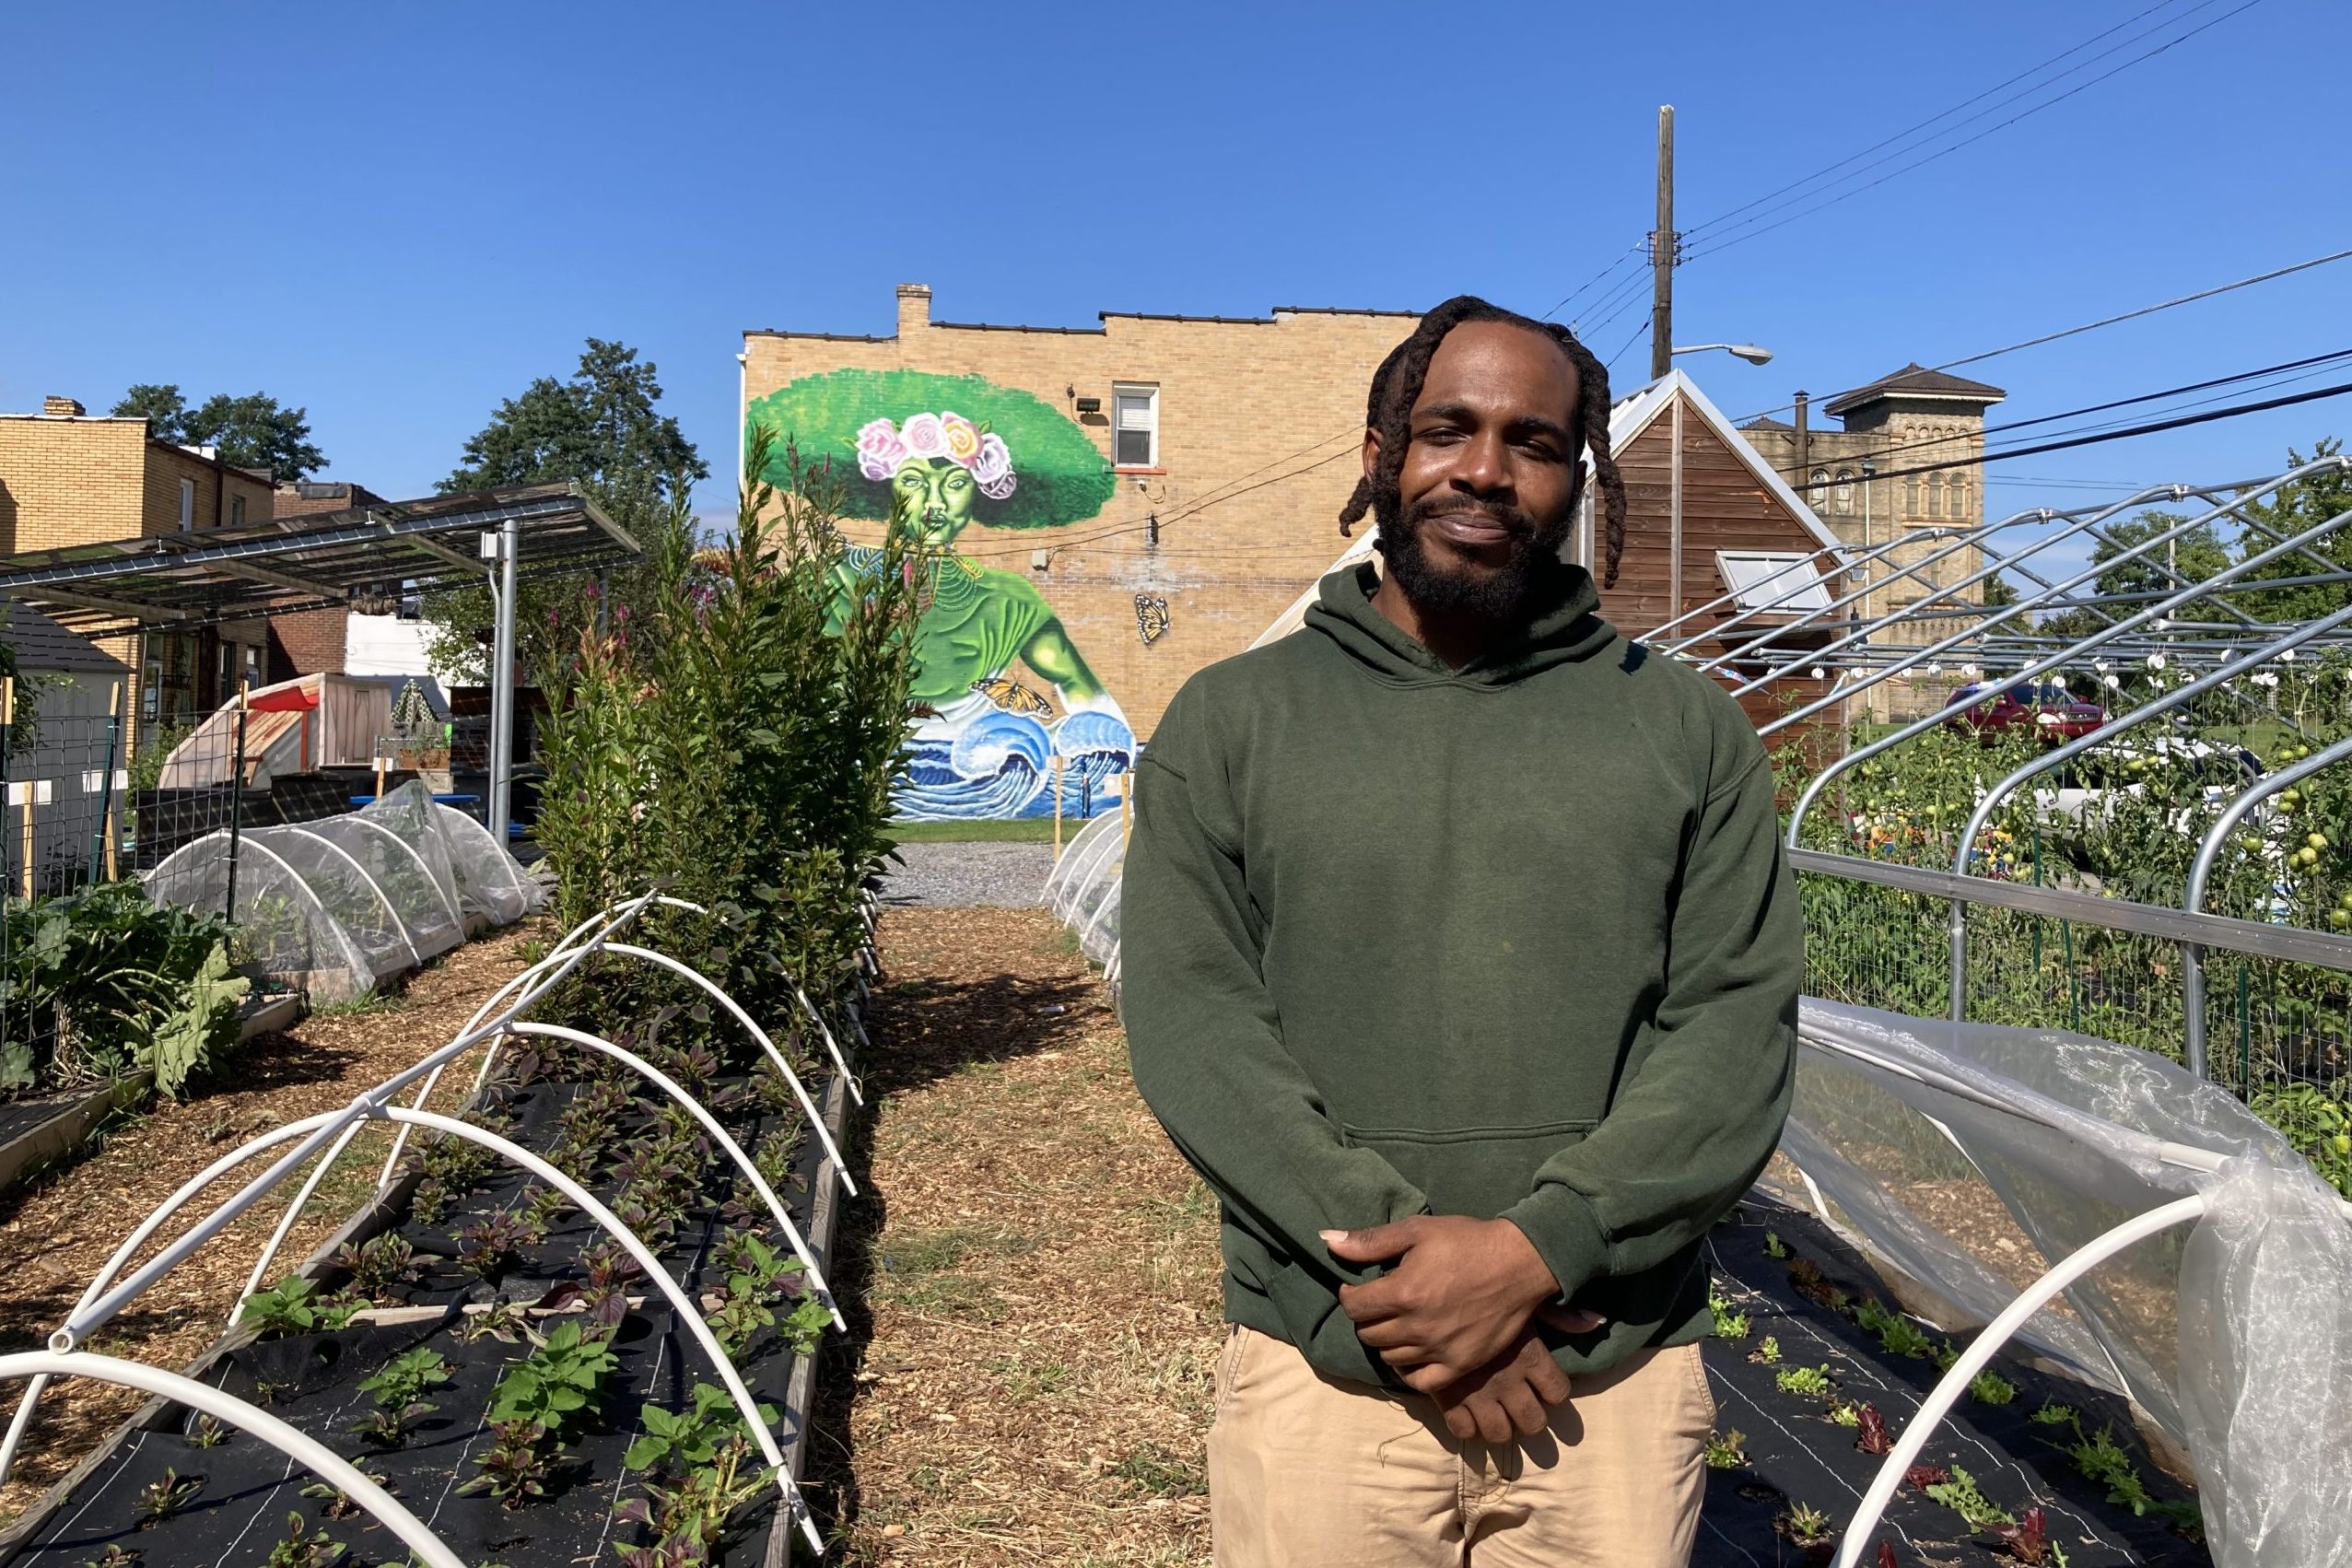 Tacumba Turner in front of covered rows of vegetables, and a building with a mural